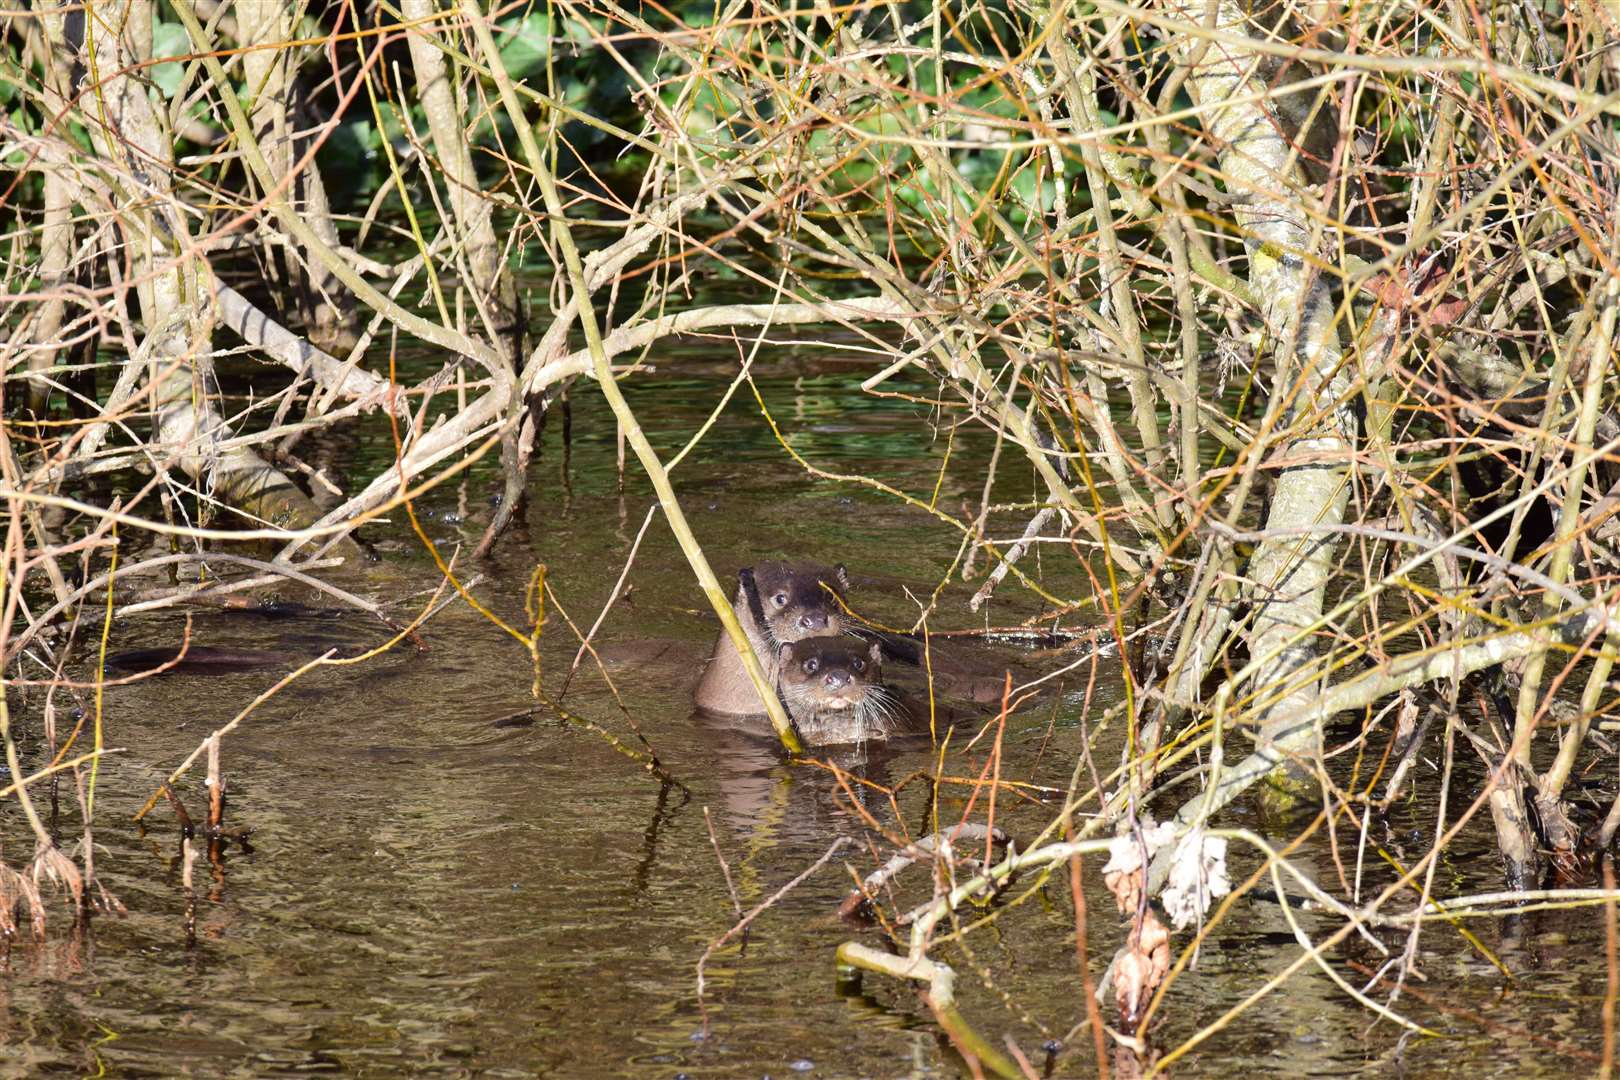 Otters have been spotted playing in the River Lossie.